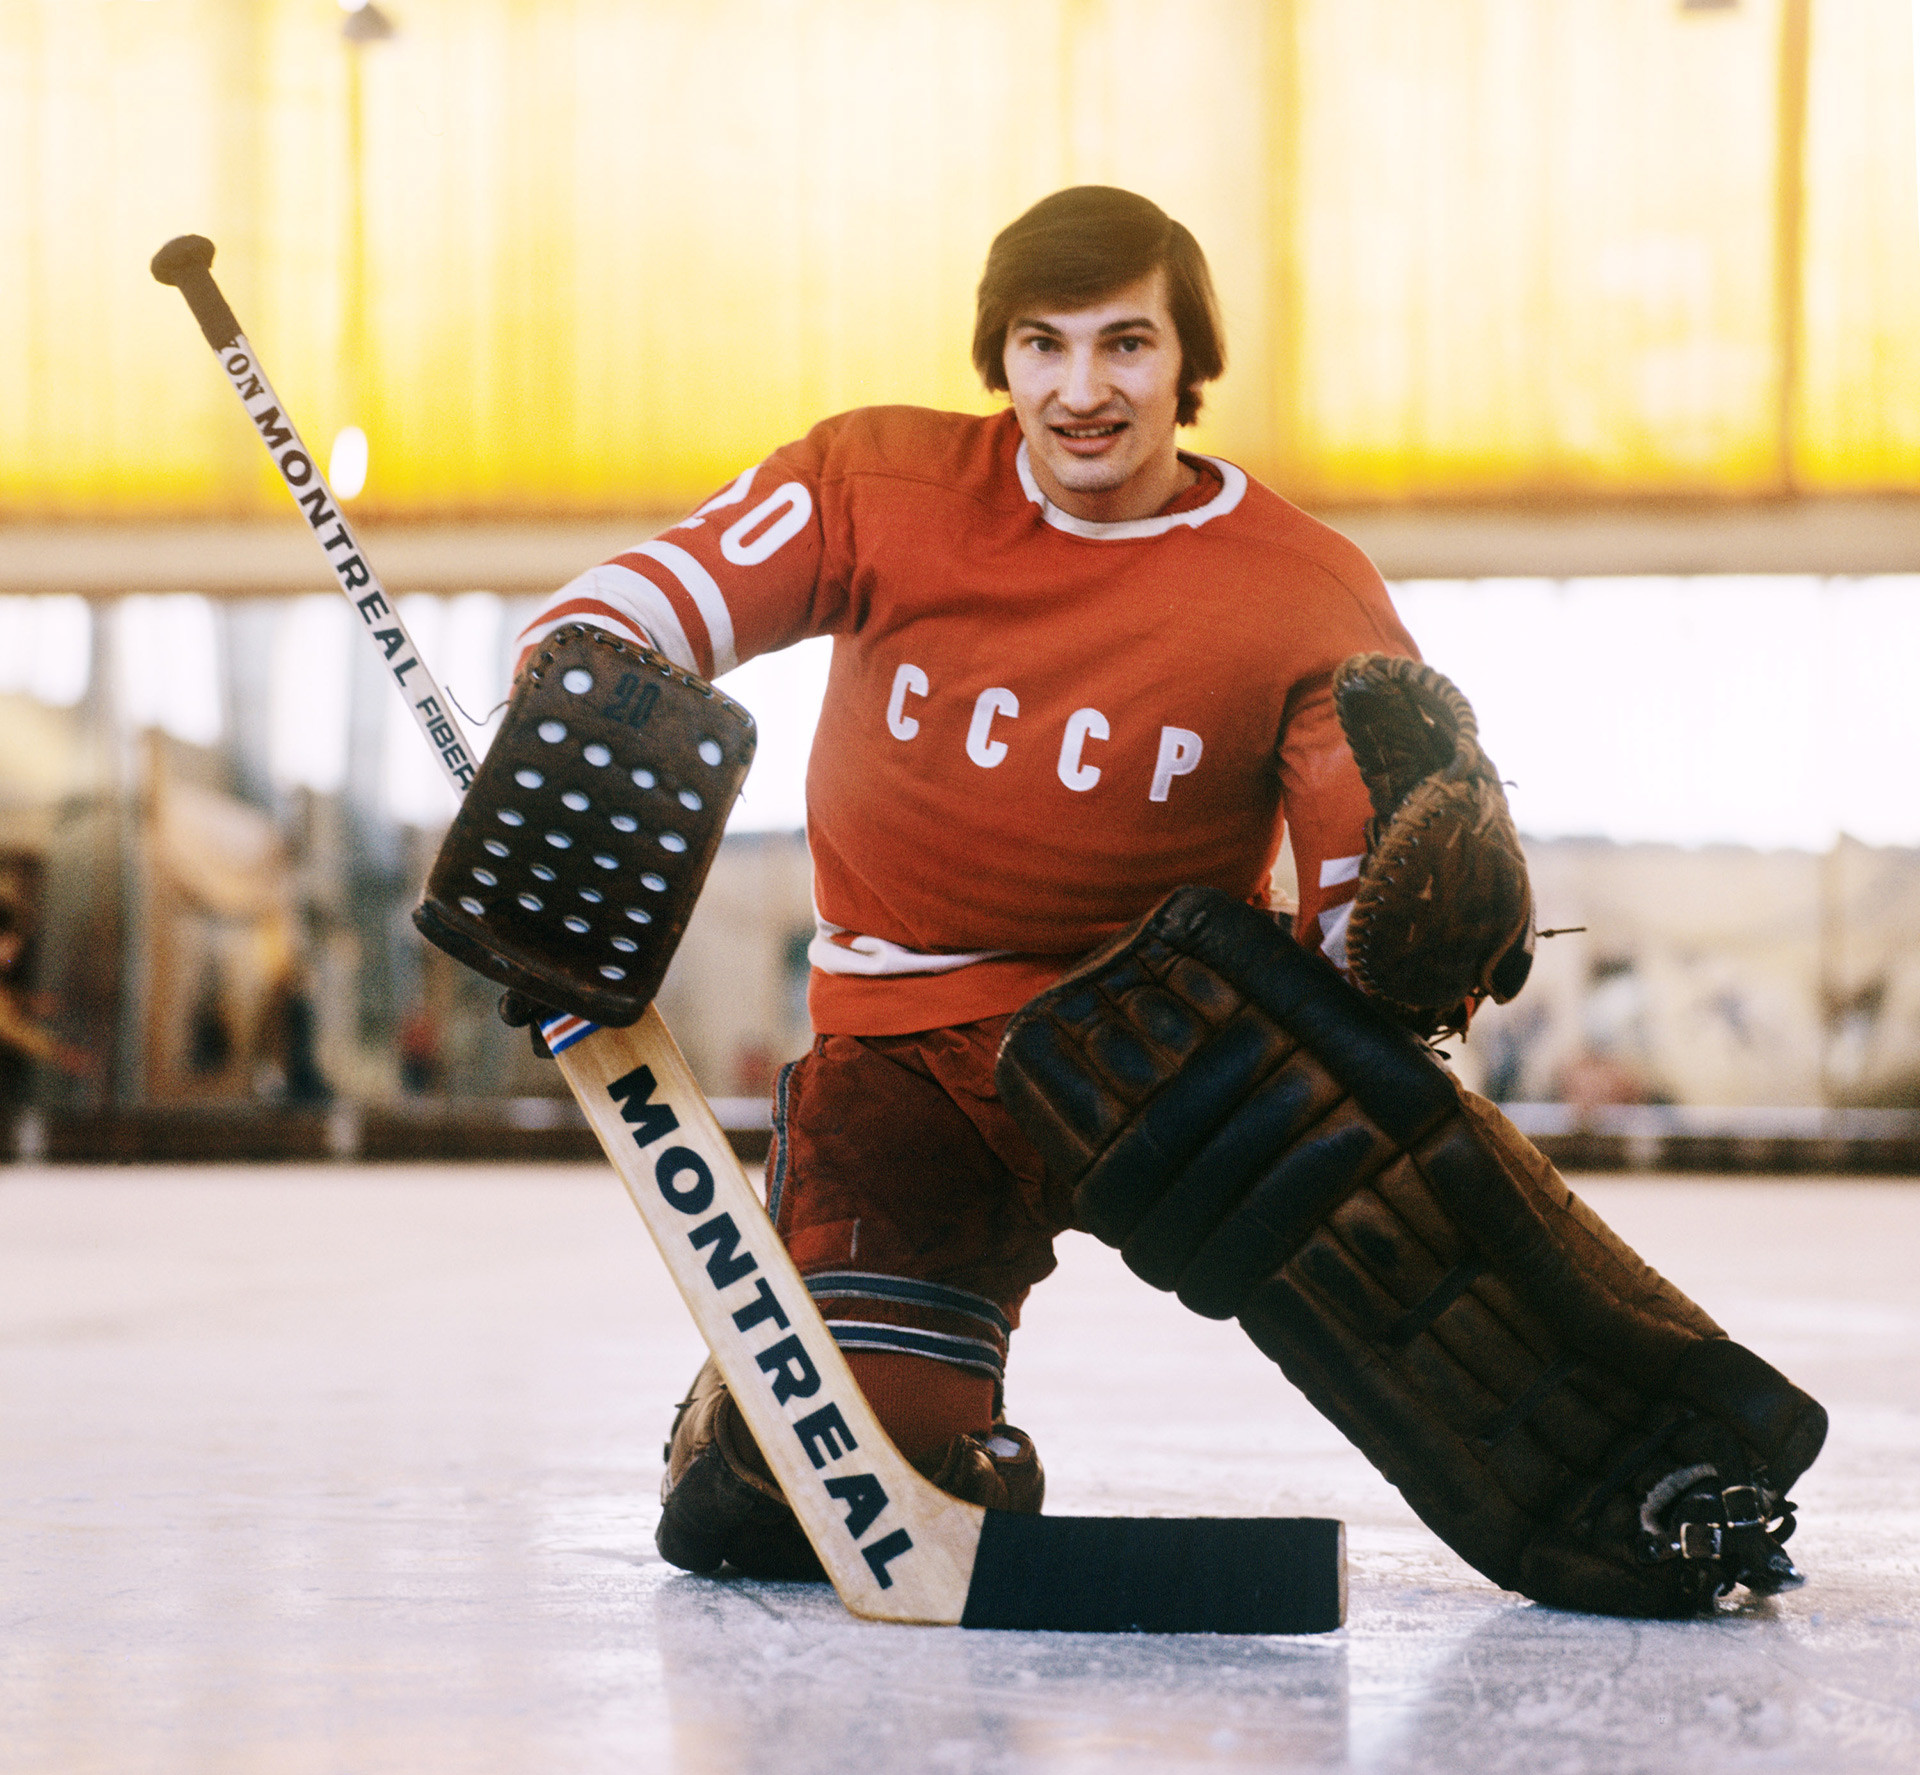 The fearsome Red Machine: The meteoric rise and dramatic decline of Soviet  hockey - Russia Beyond